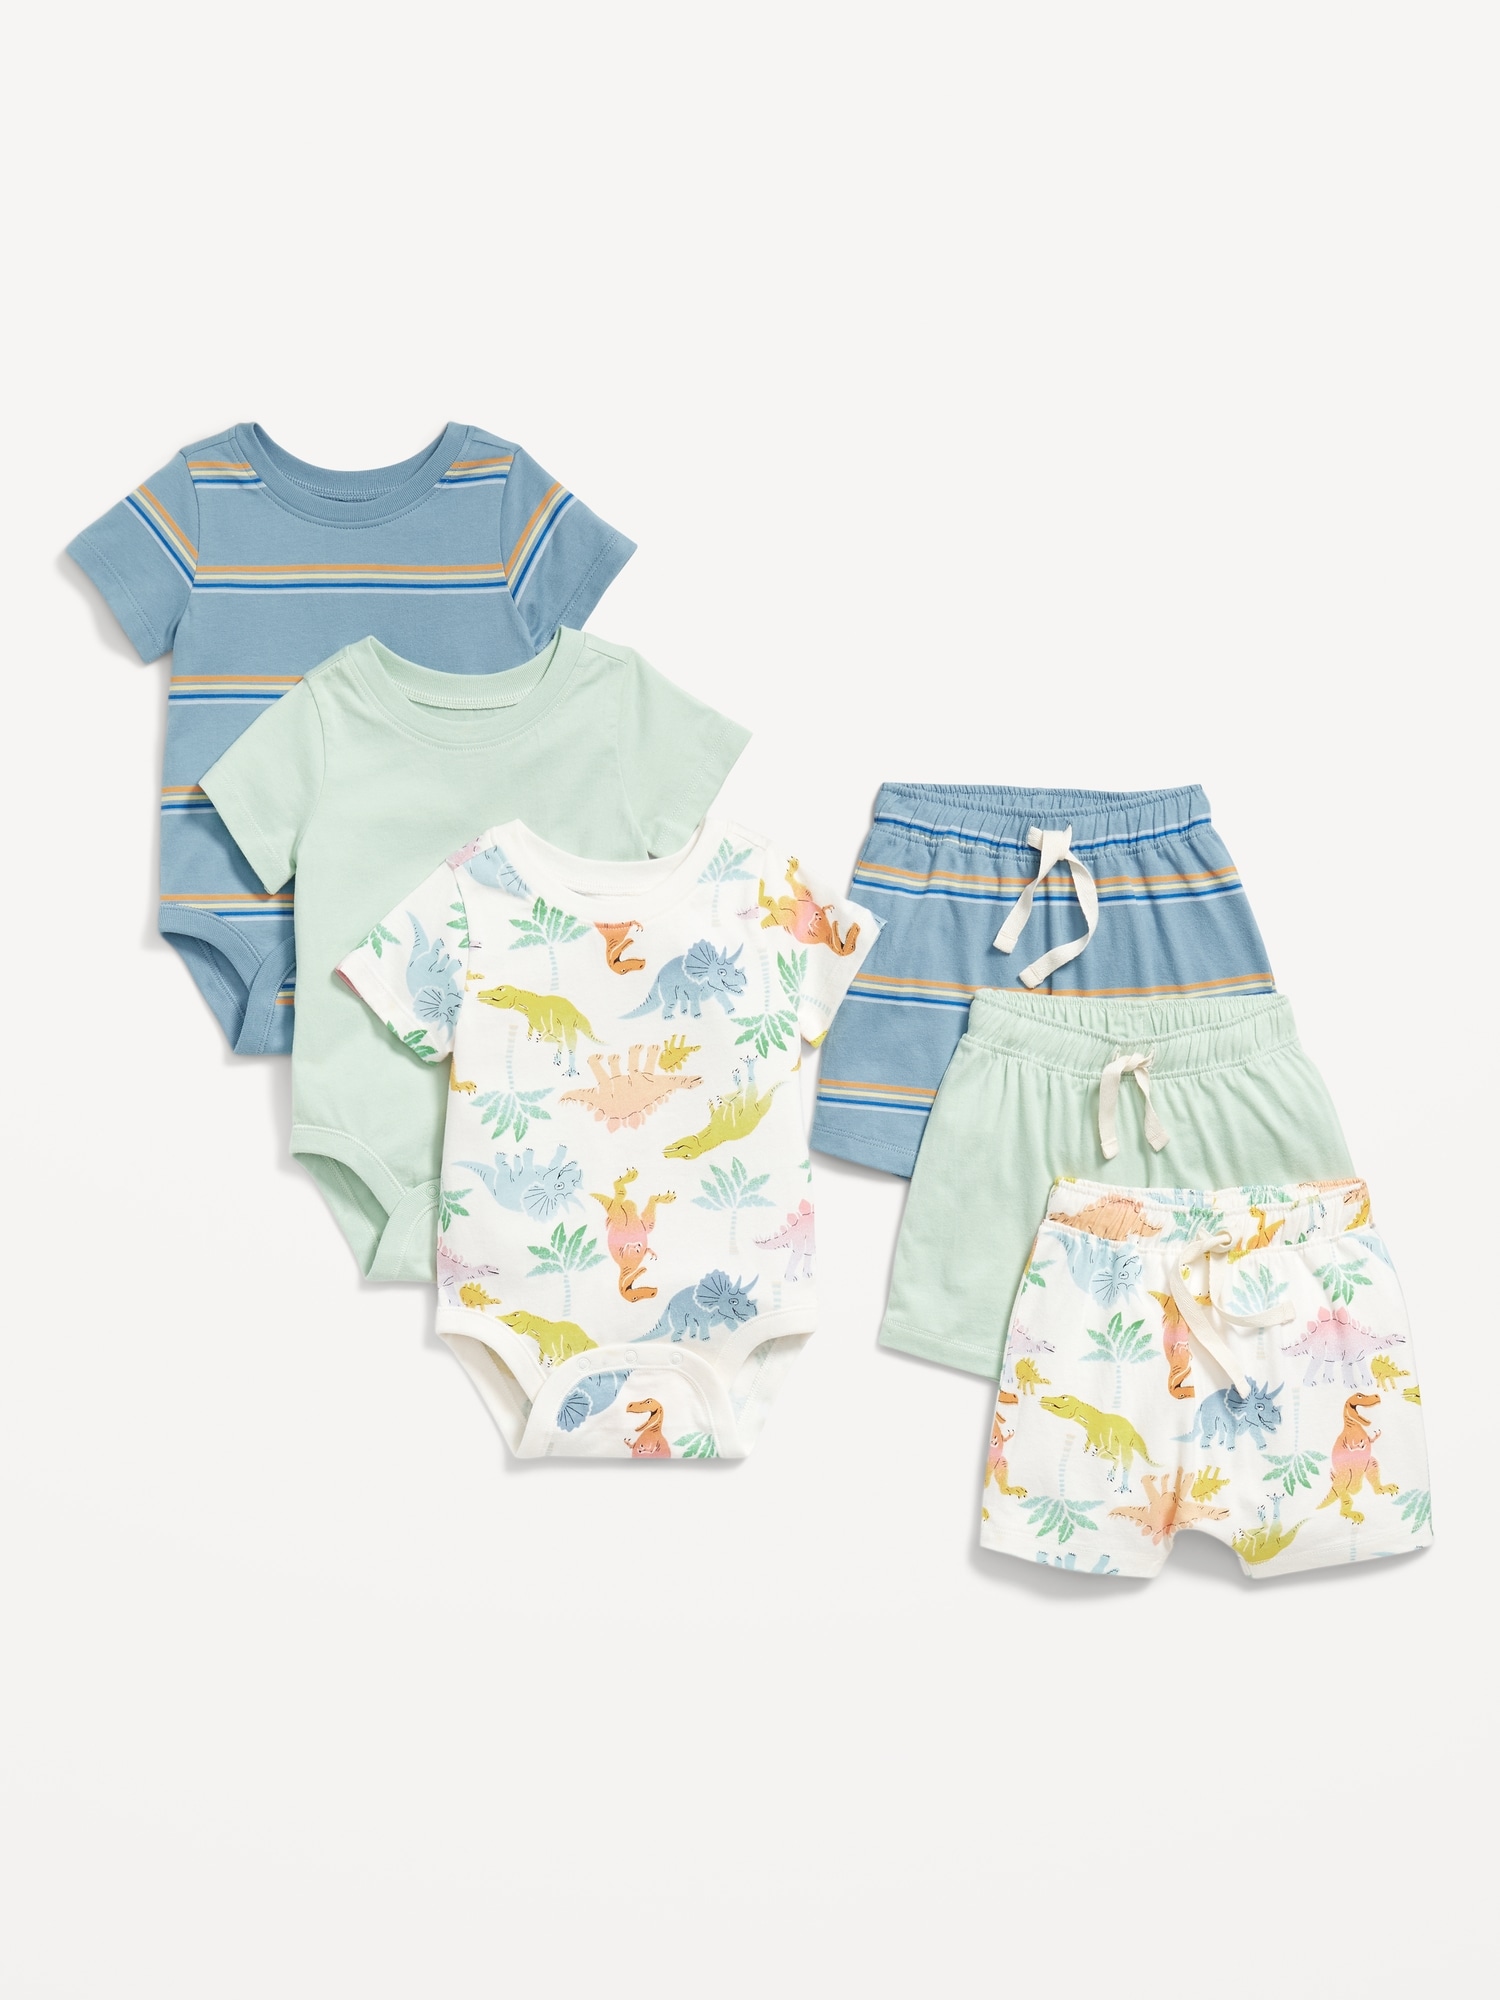 Bodysuit and Shorts 6-Pack for Baby Hot Deal